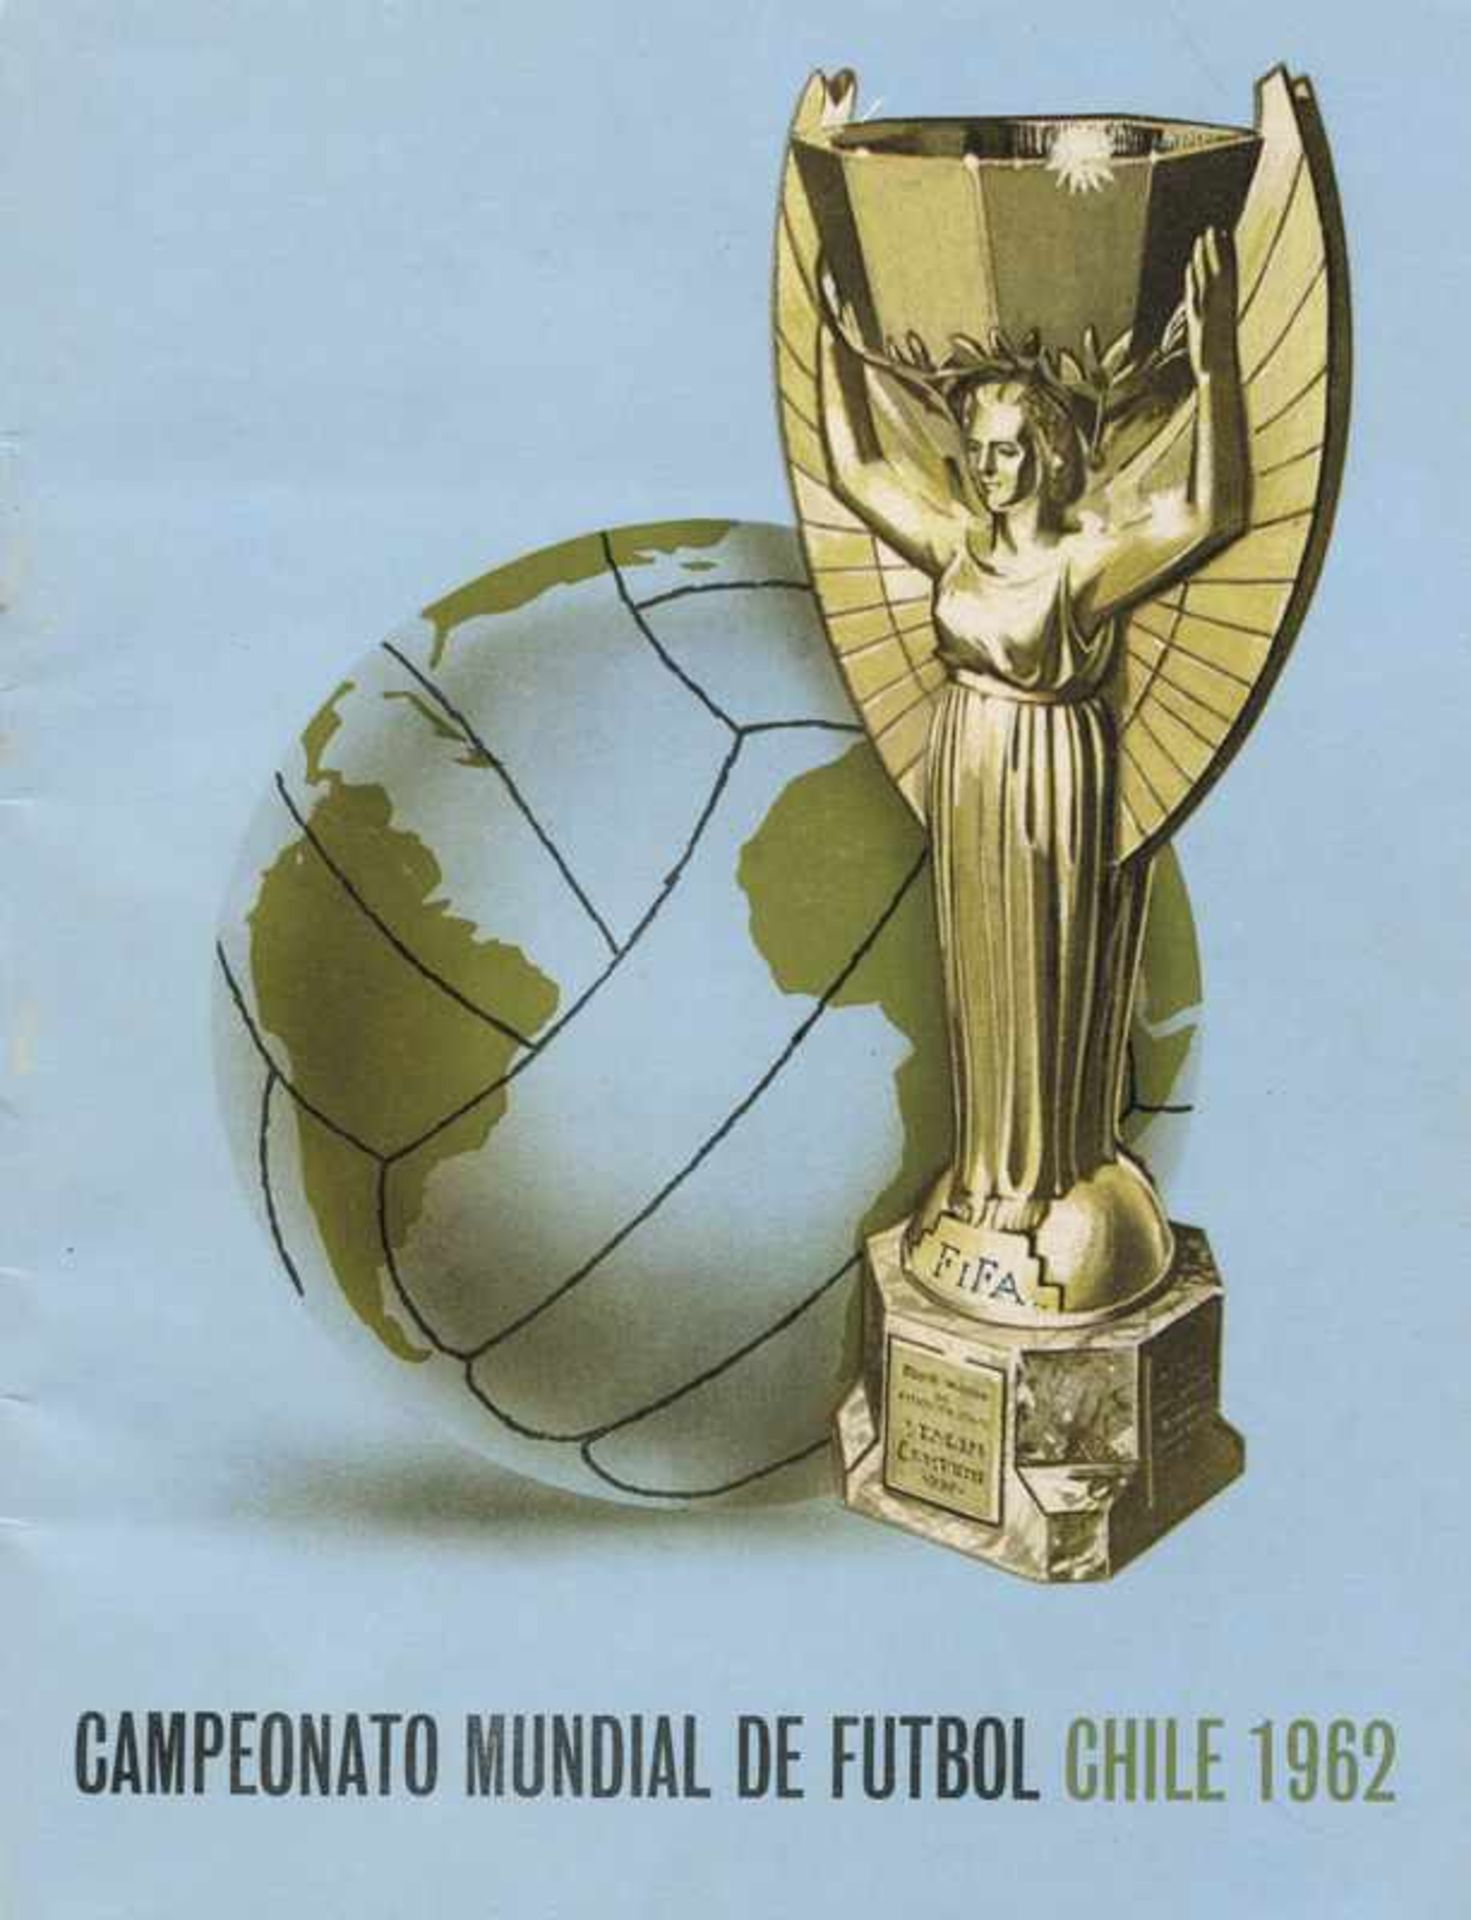 World Cup 1962. Rare Programm from Tabacos - Complete programme of the games with forewords from the